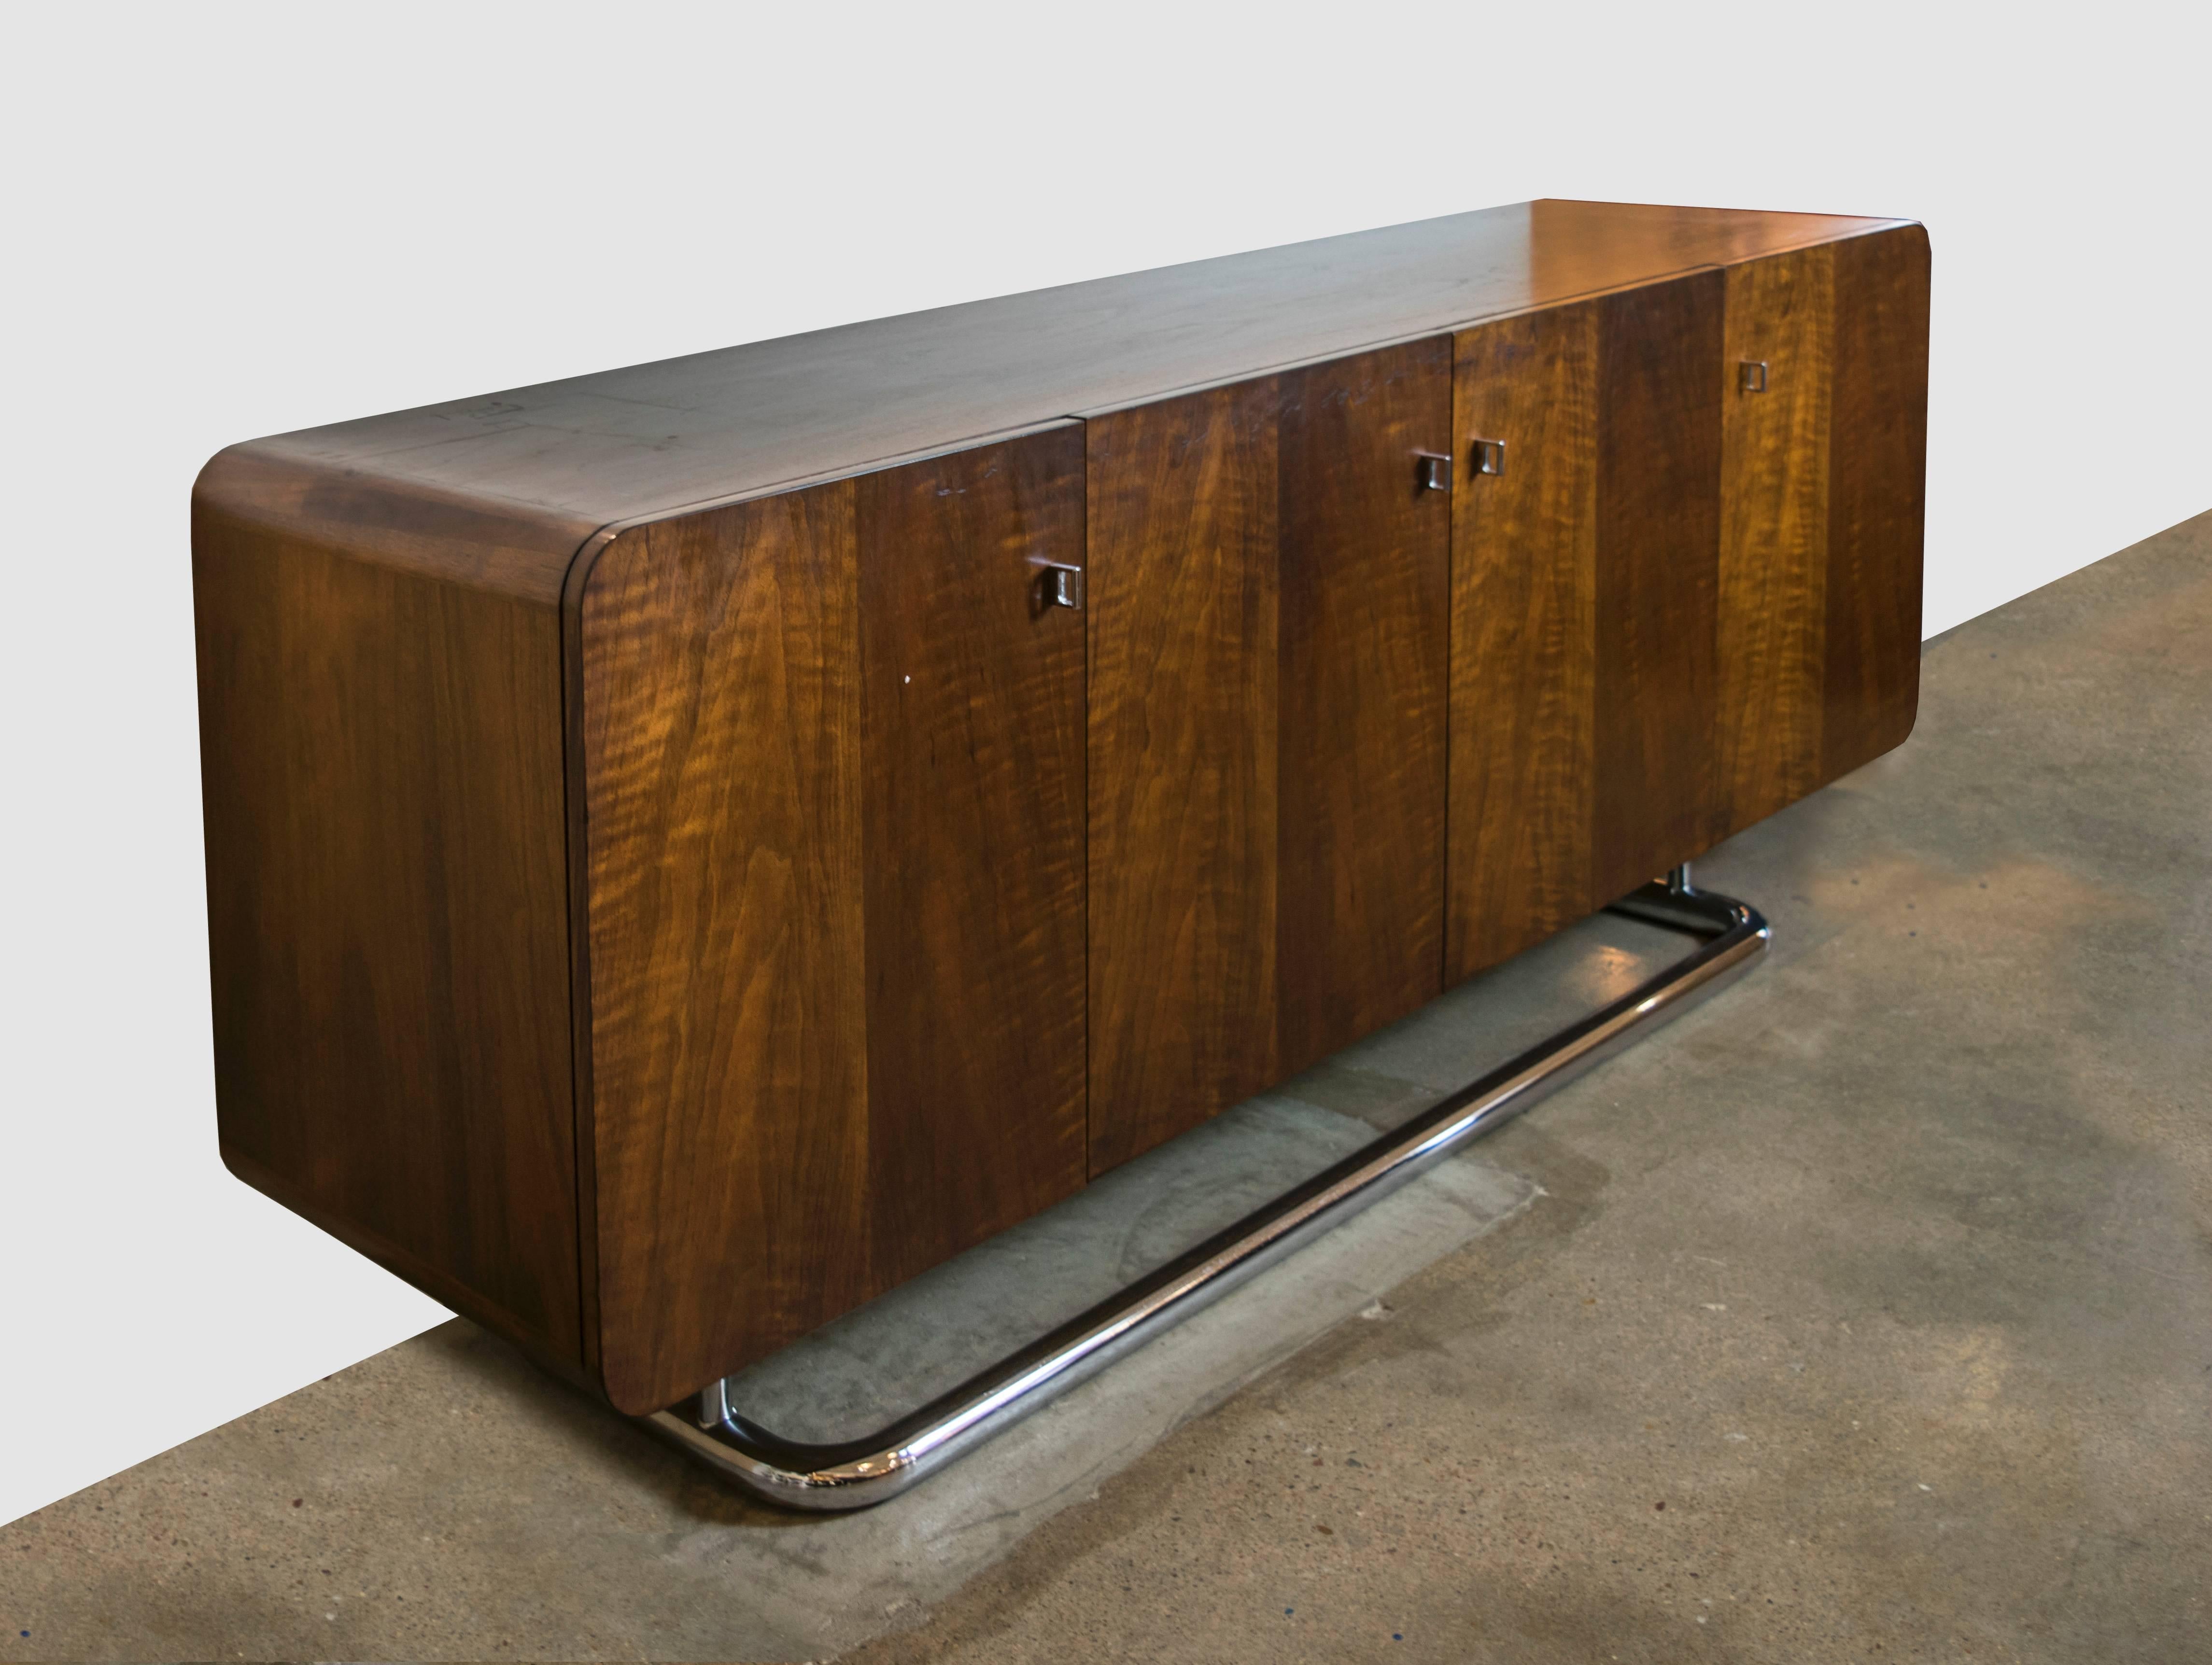 An early 1970s Thomasville credenza in a stunning black walnut with dramatic grain patterning. Rounded edges soften the look of the cabinet and its situated on top of a recessed cantilevered rounded chrome base. With chrome finger pulls and is